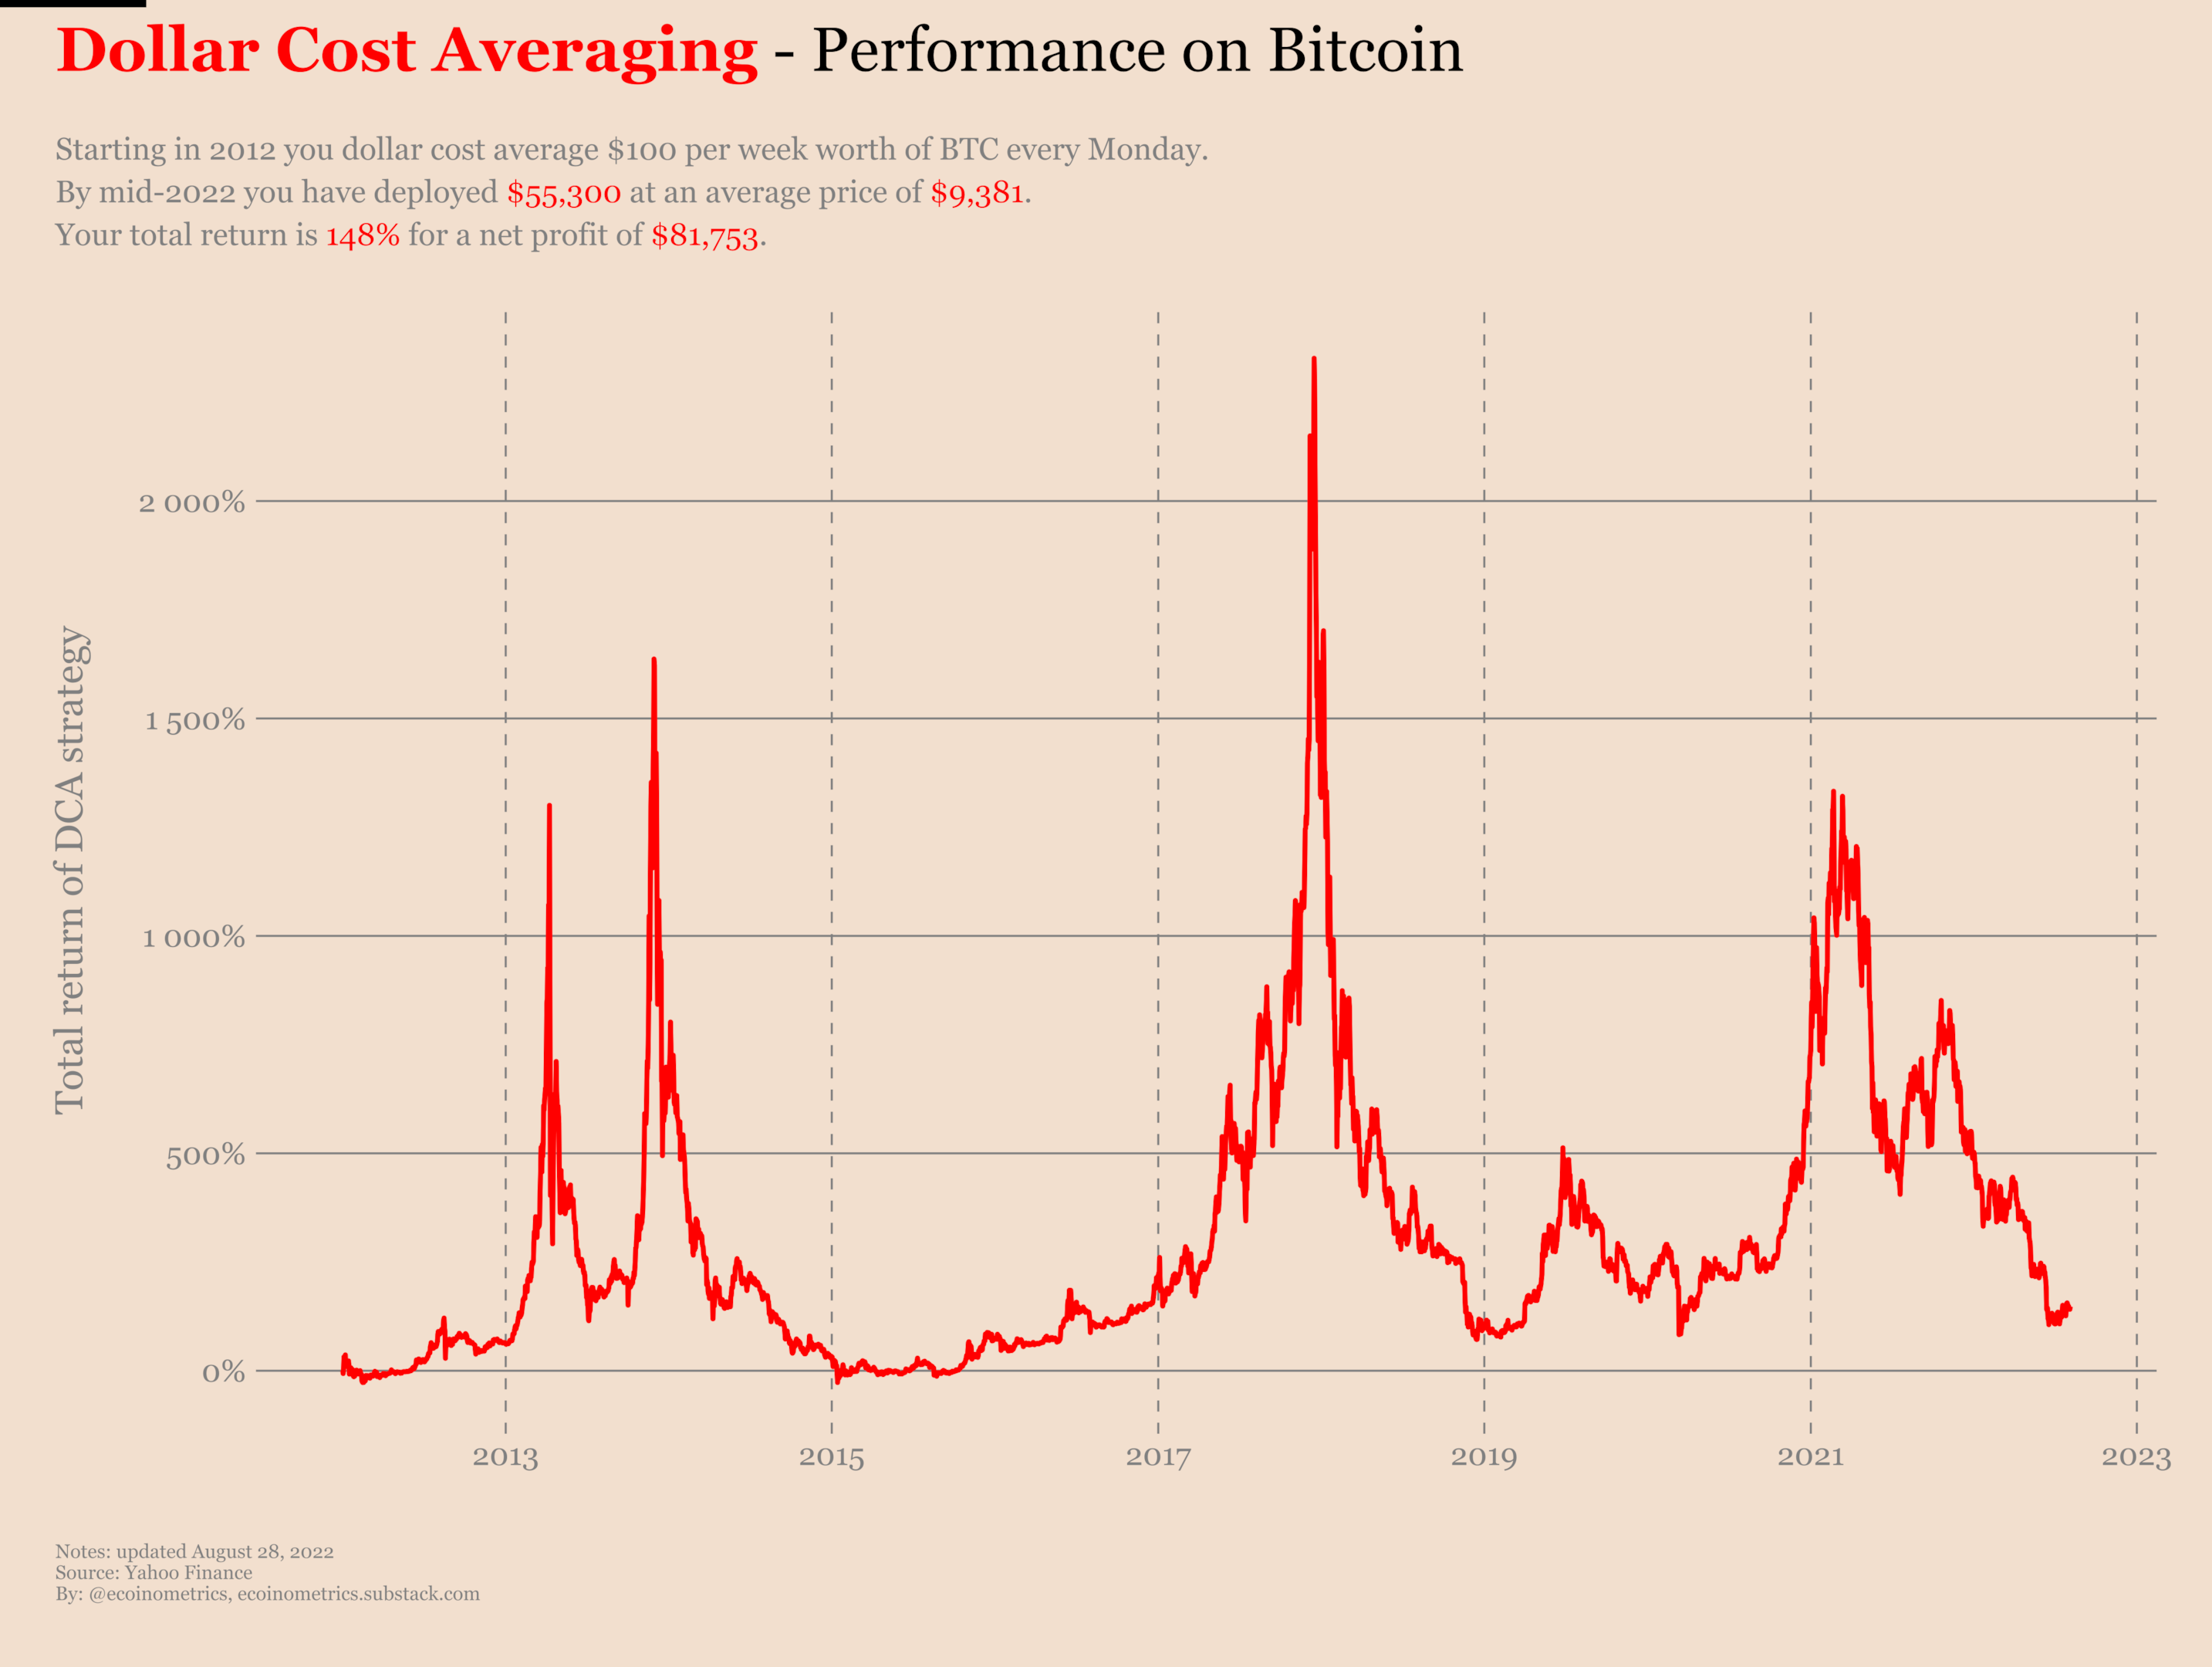 Performance of dollar cost averaging Bitcoin since 2012.